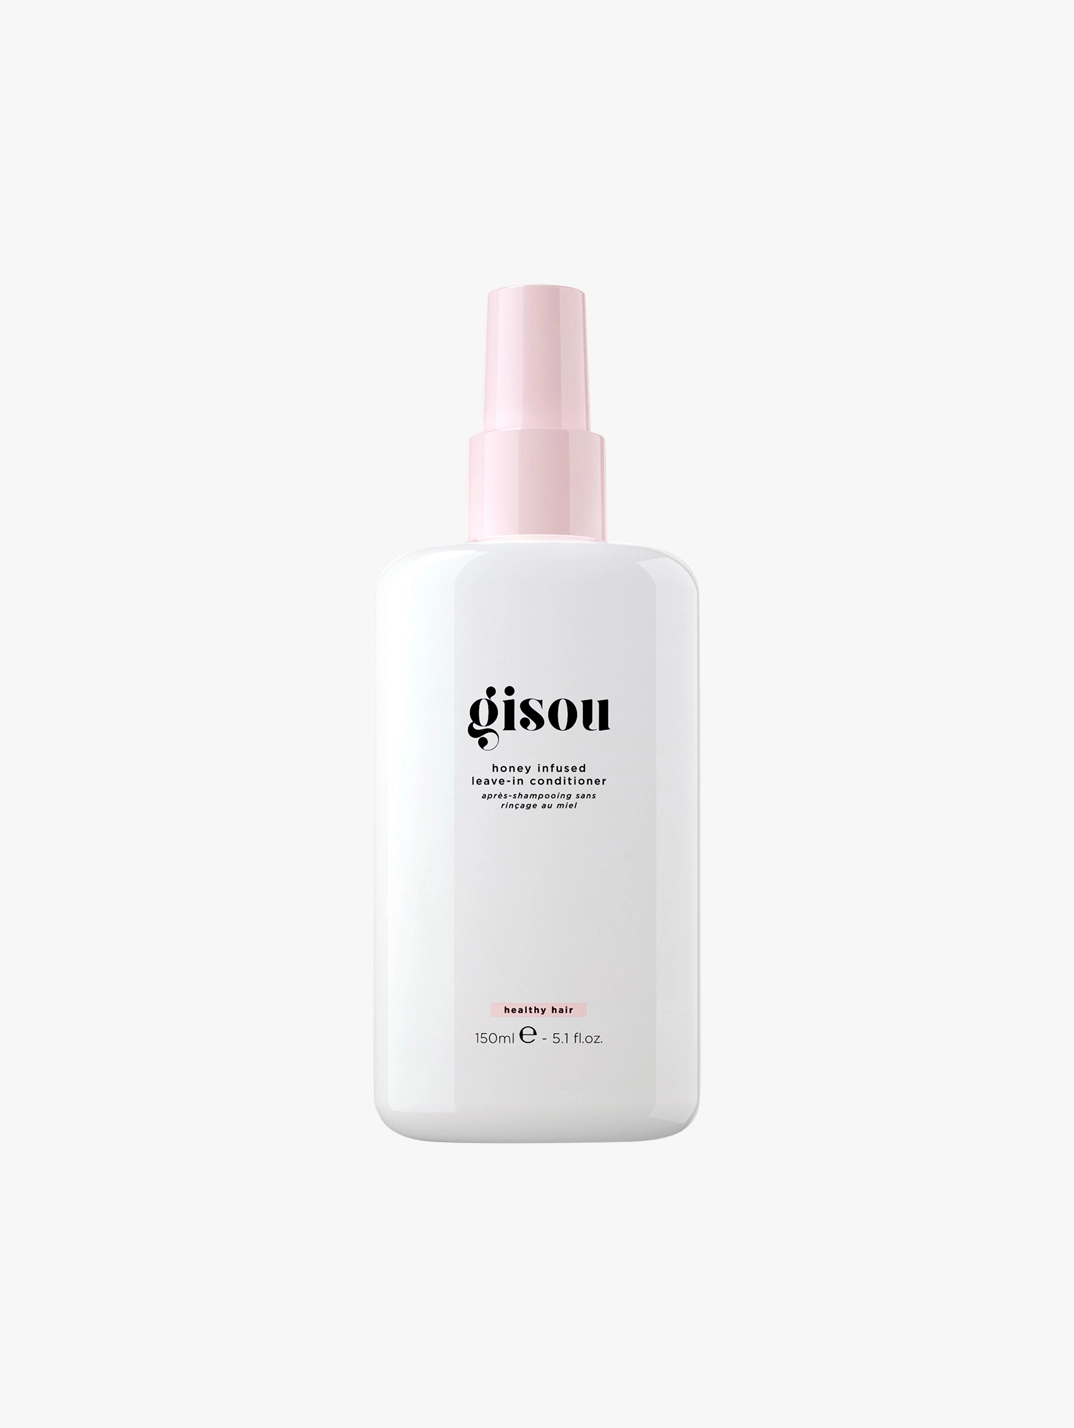 Gisou Honey Infused Leave-In Conditioner | MECCA